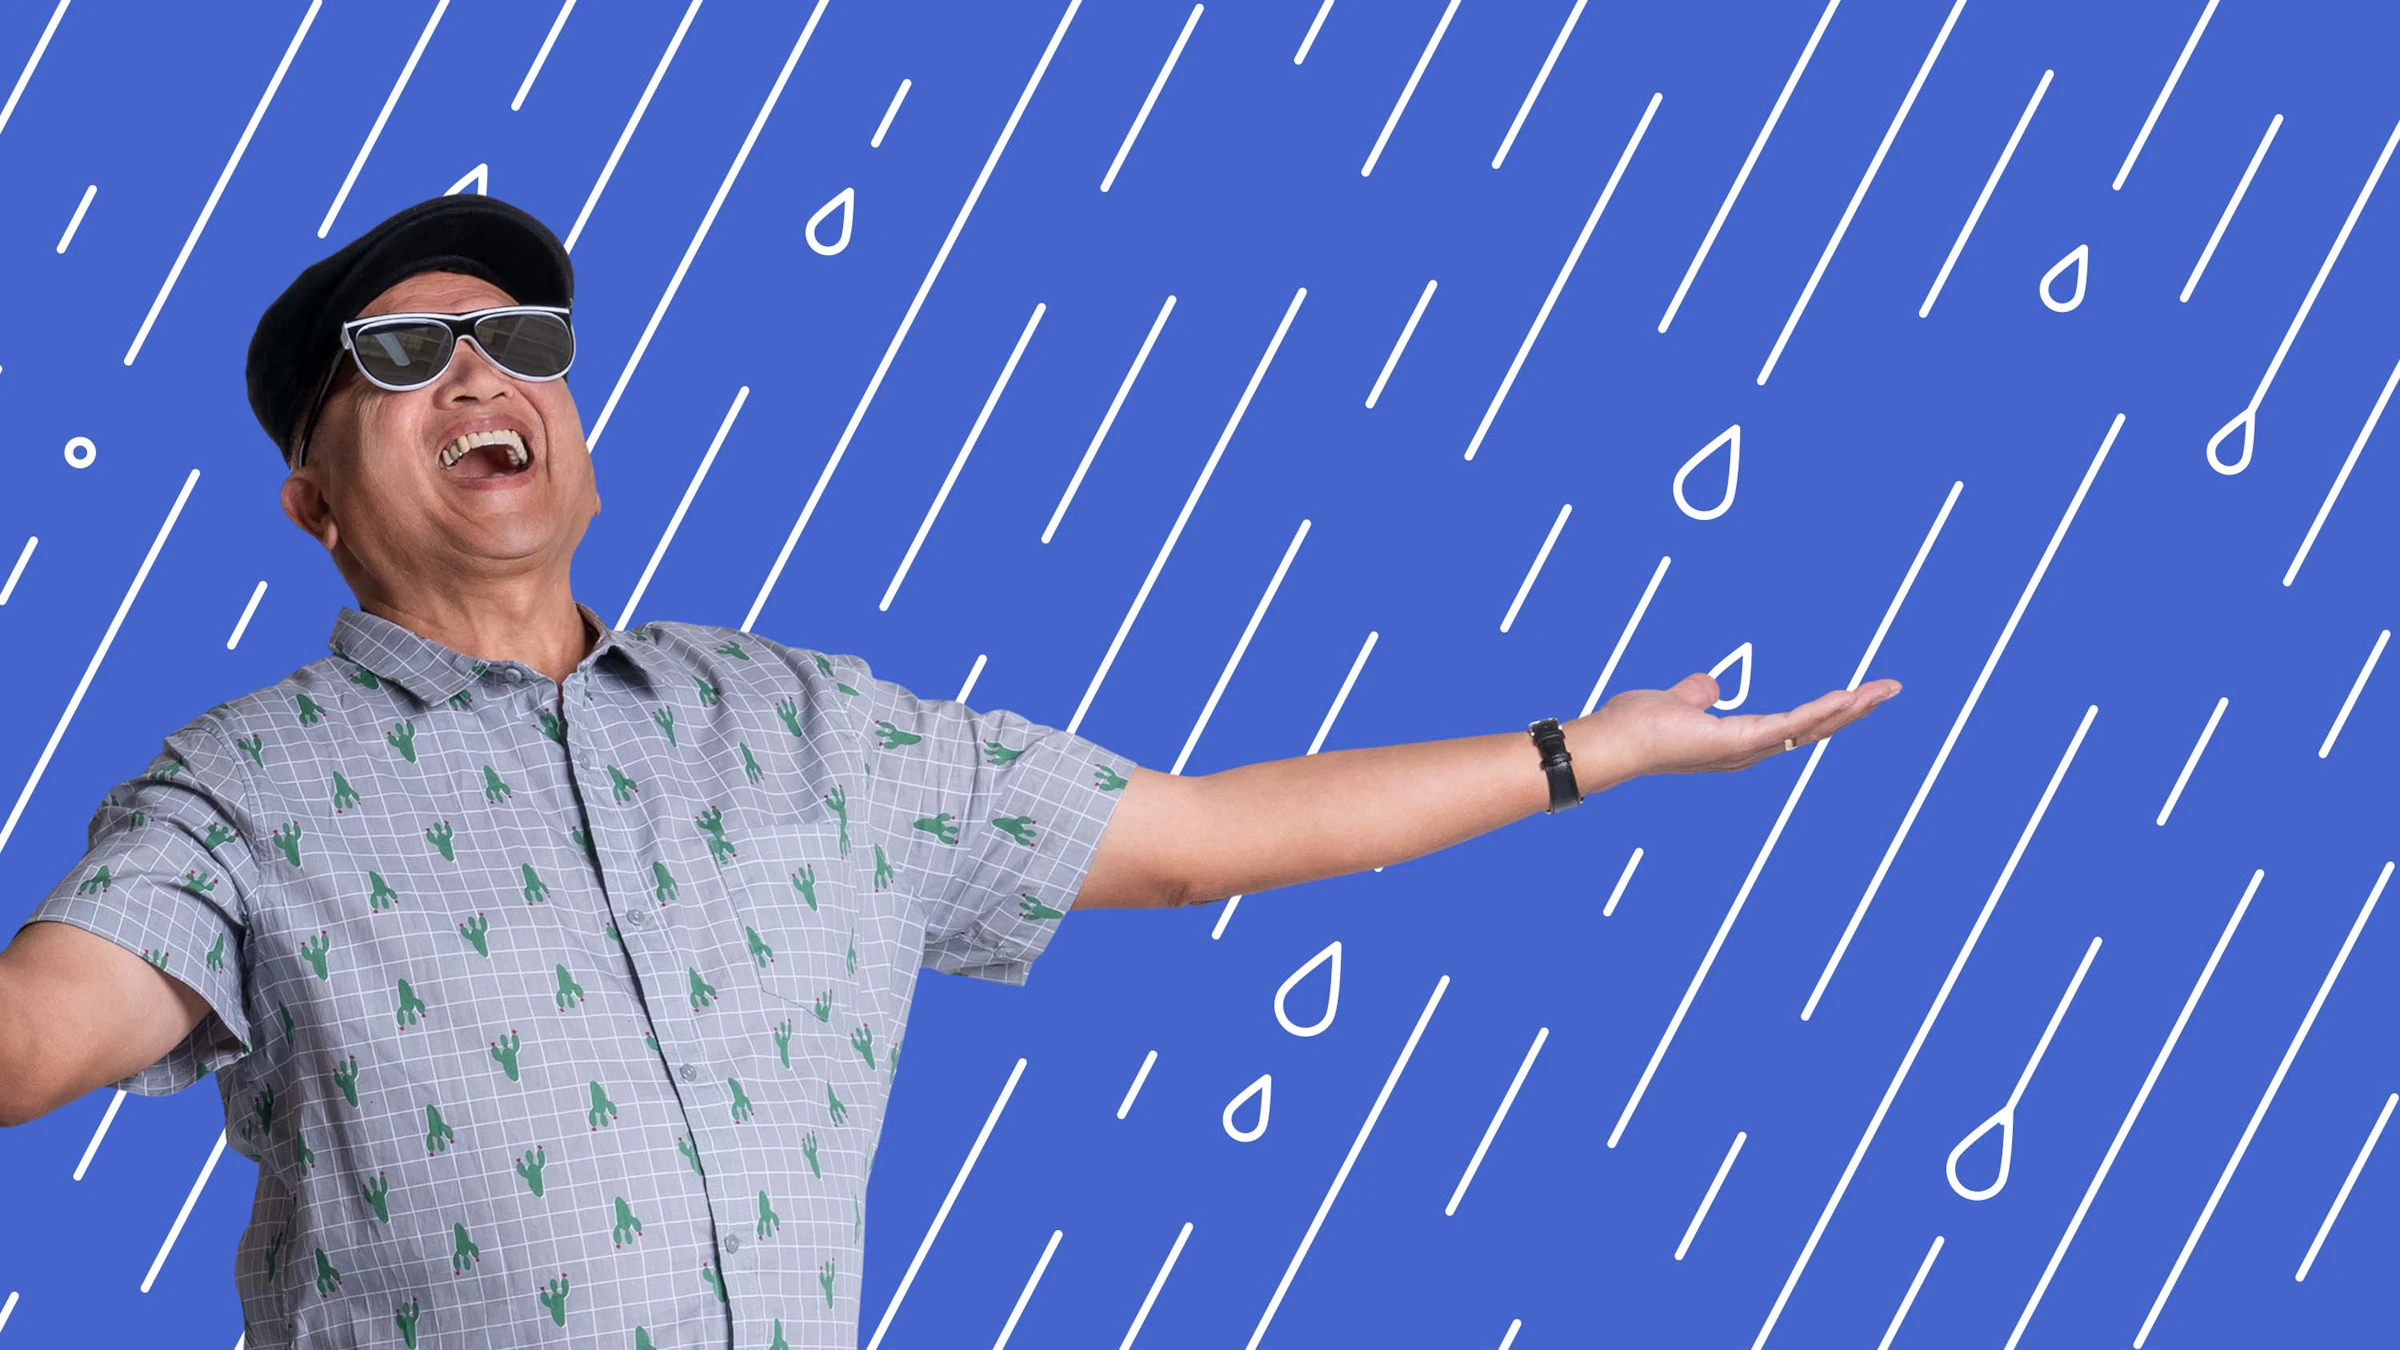 Elder man in sunglasses and hat standing arms outstretched against blue rain graphic active adult